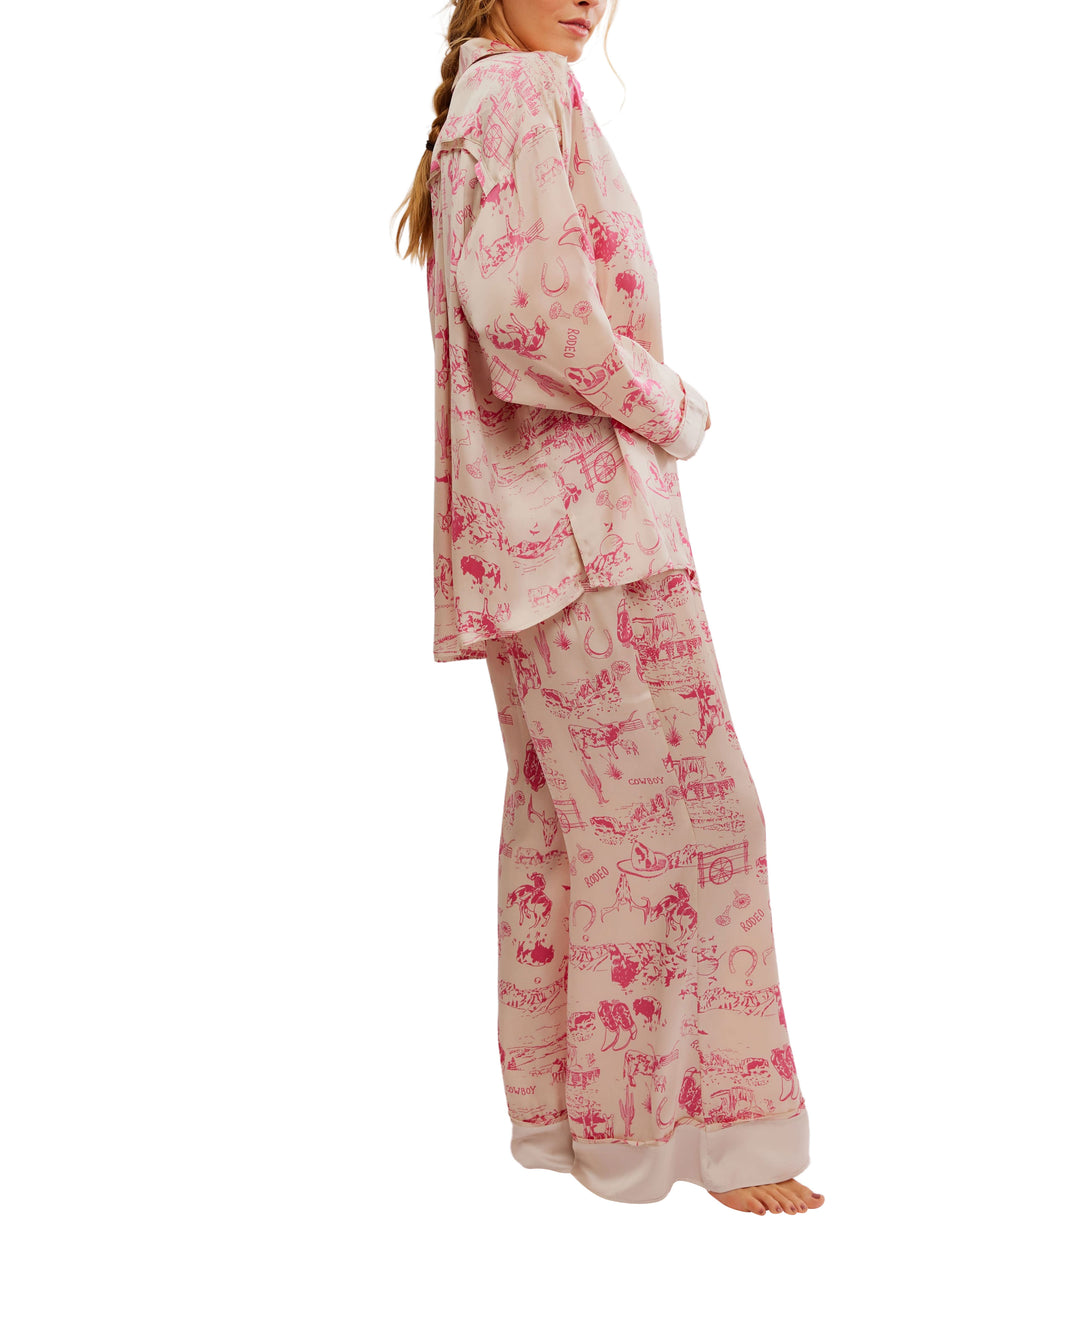 Dreamy Days Pajama Set in Pink Rodeo